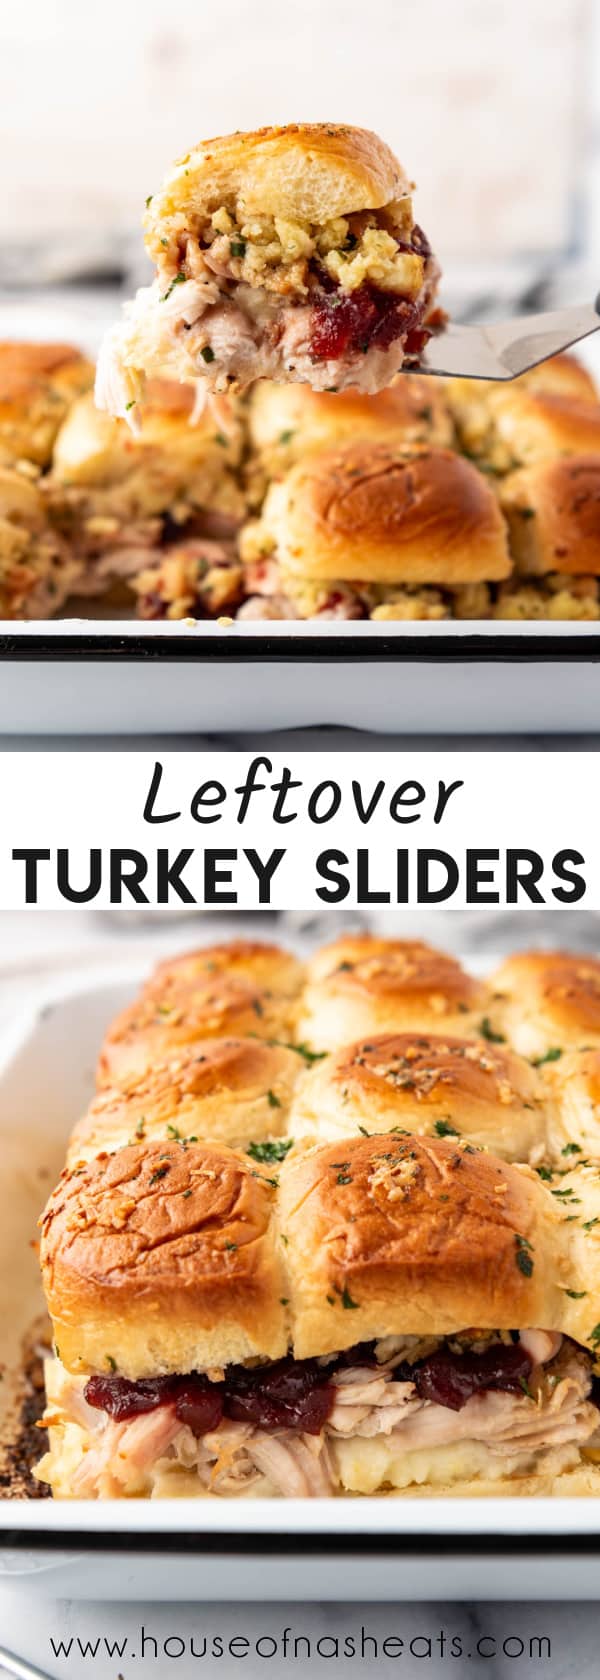 A collage of images of leftover turkey sliders with text overlay.